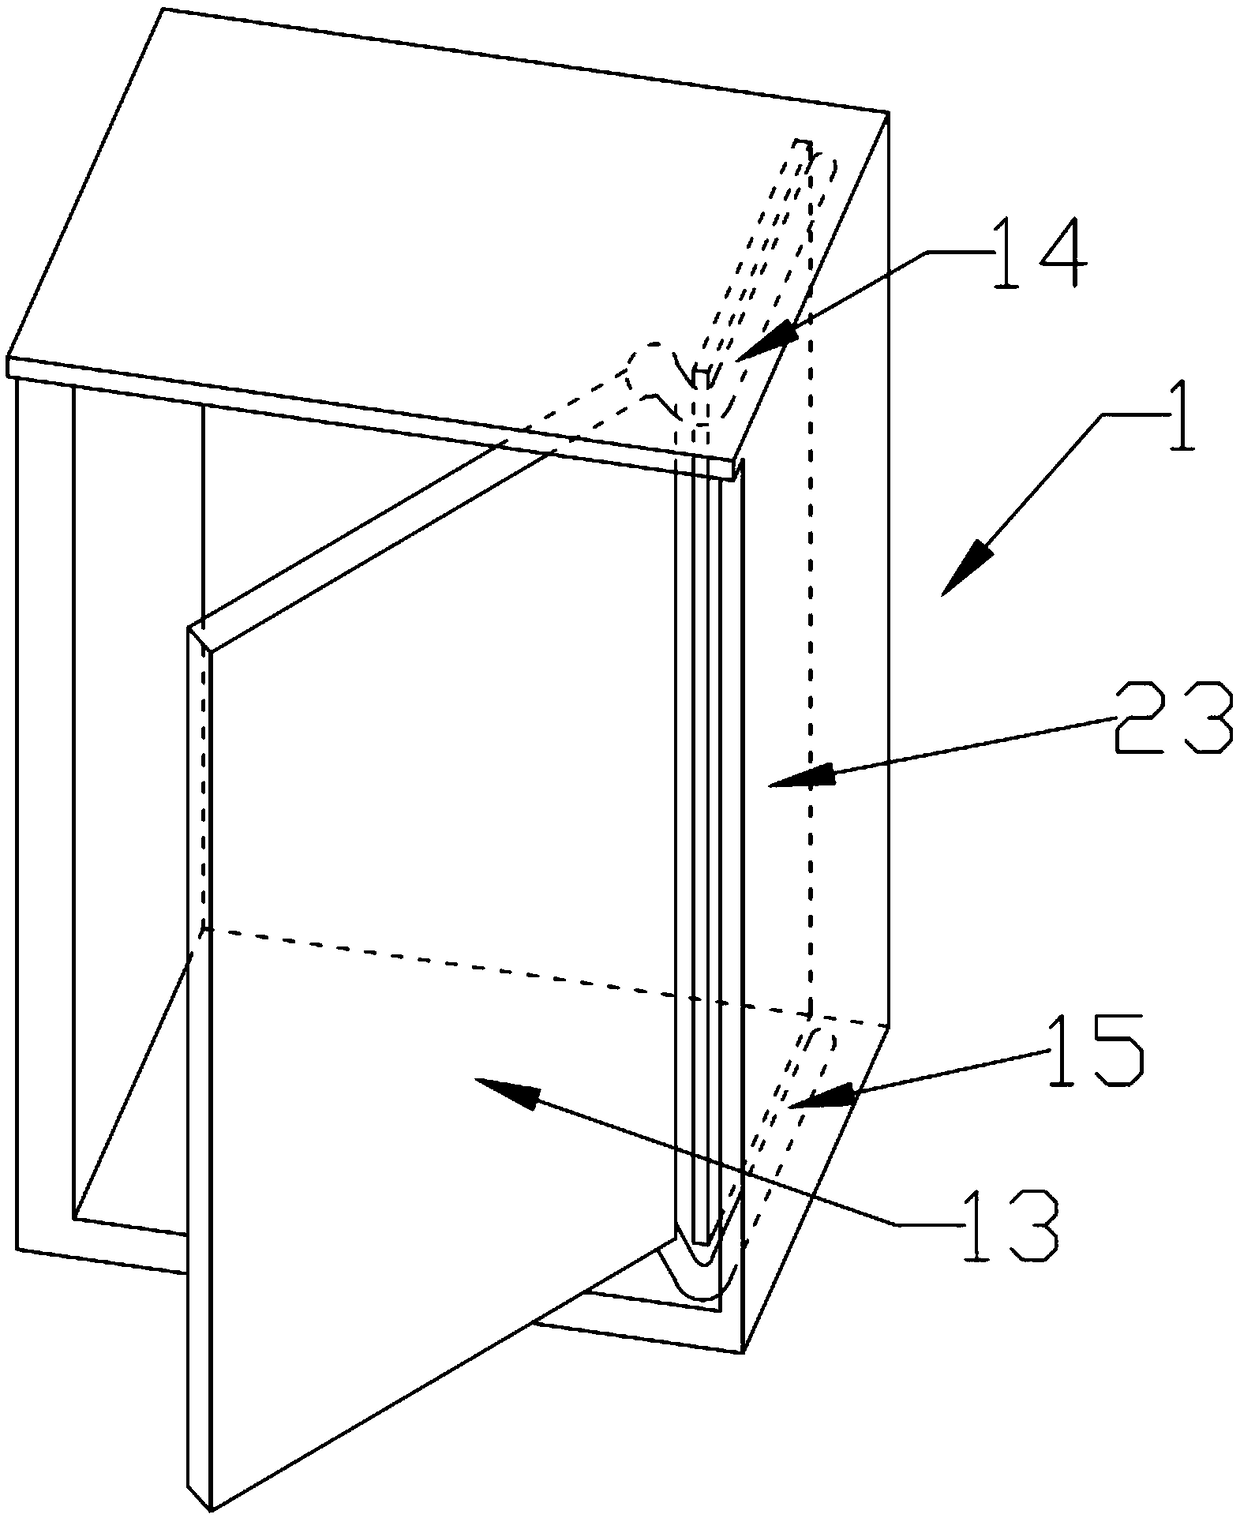 A push-pull structure of a switch cabinet